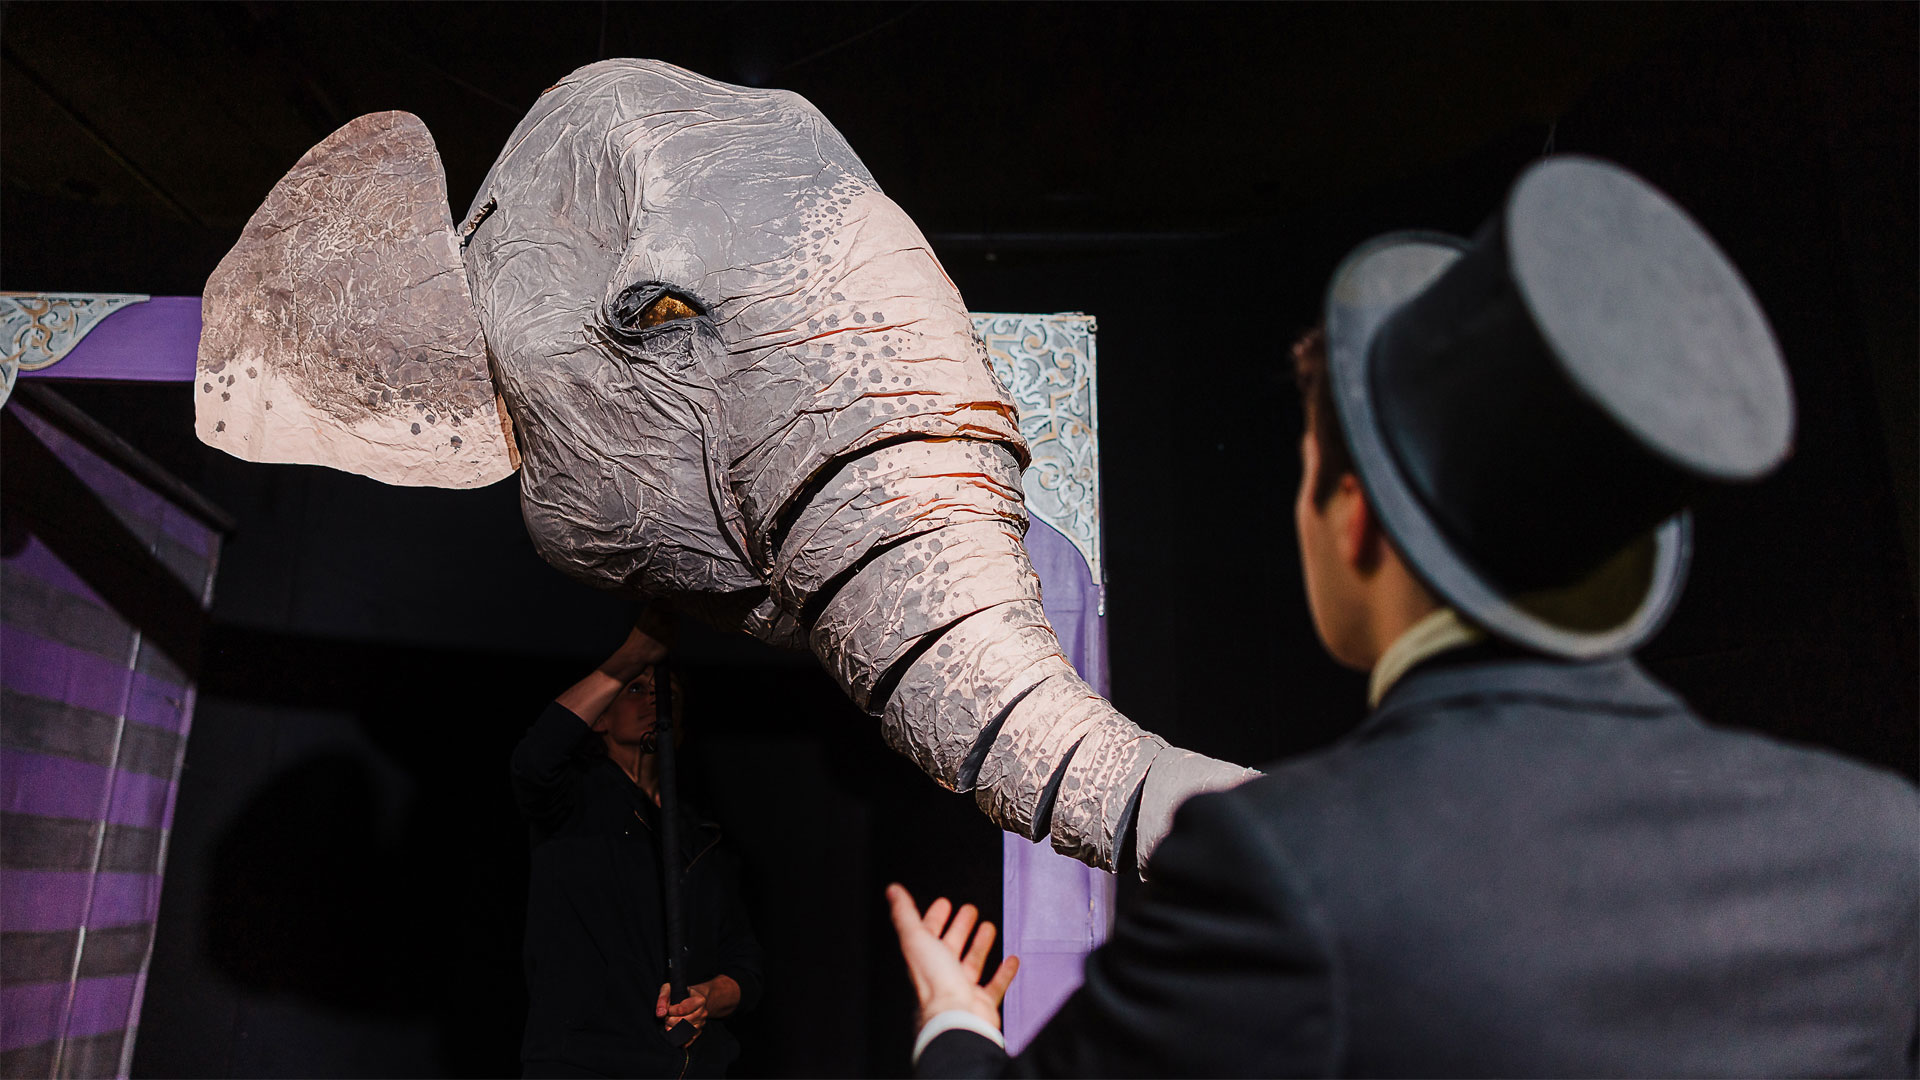 Puppet of an elephant head facing a person wearing a suit and top hat shown from behind